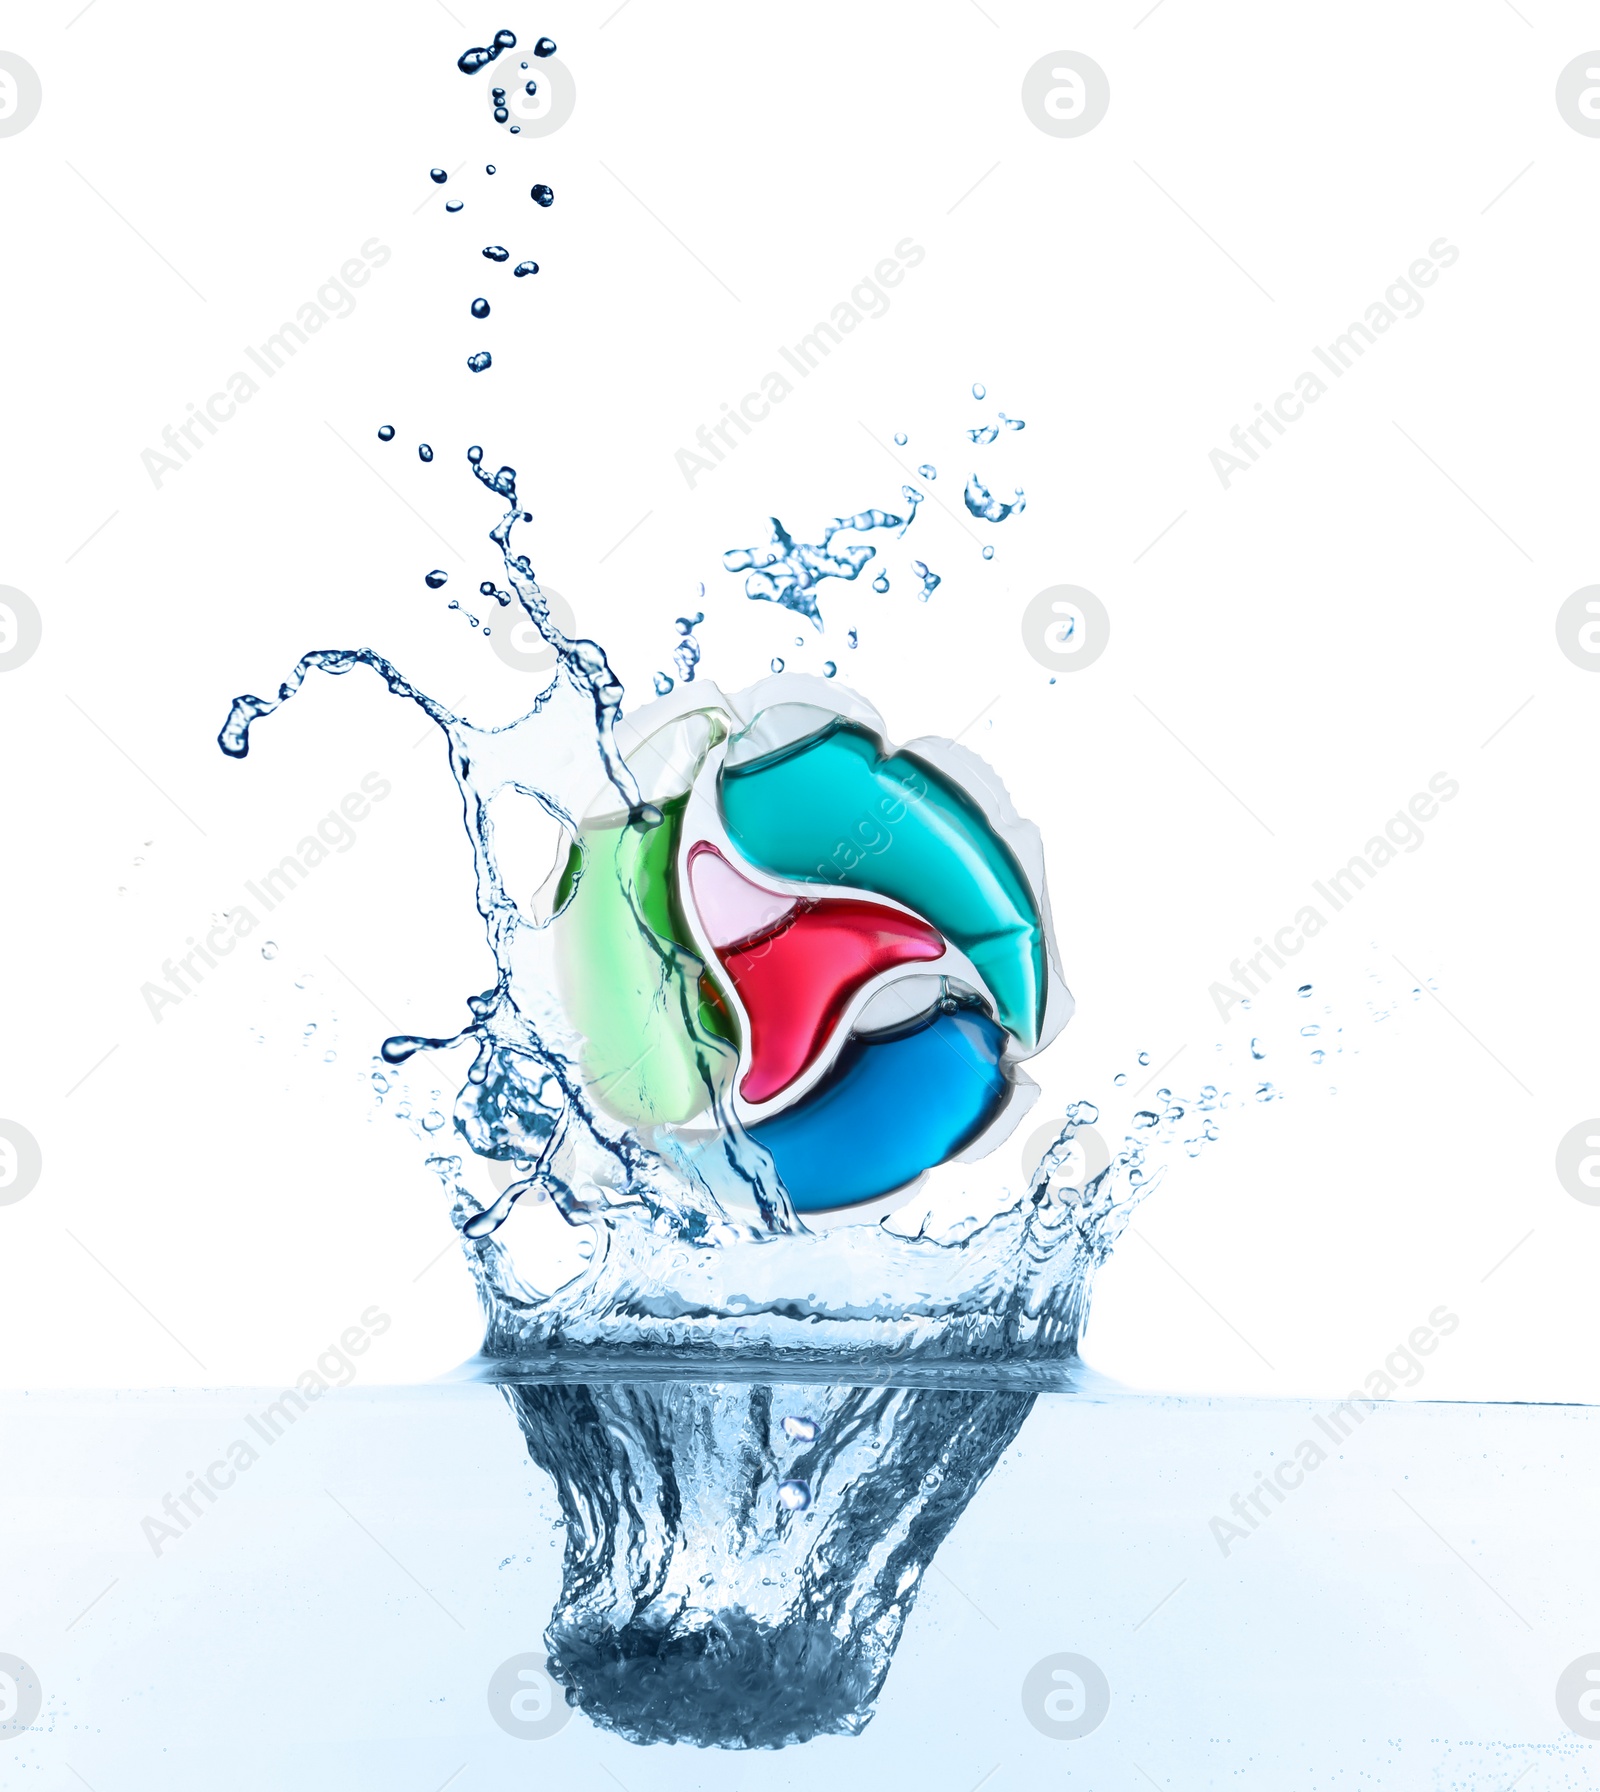 Image of Laundry capsule falling into water on white background. Detergent pod